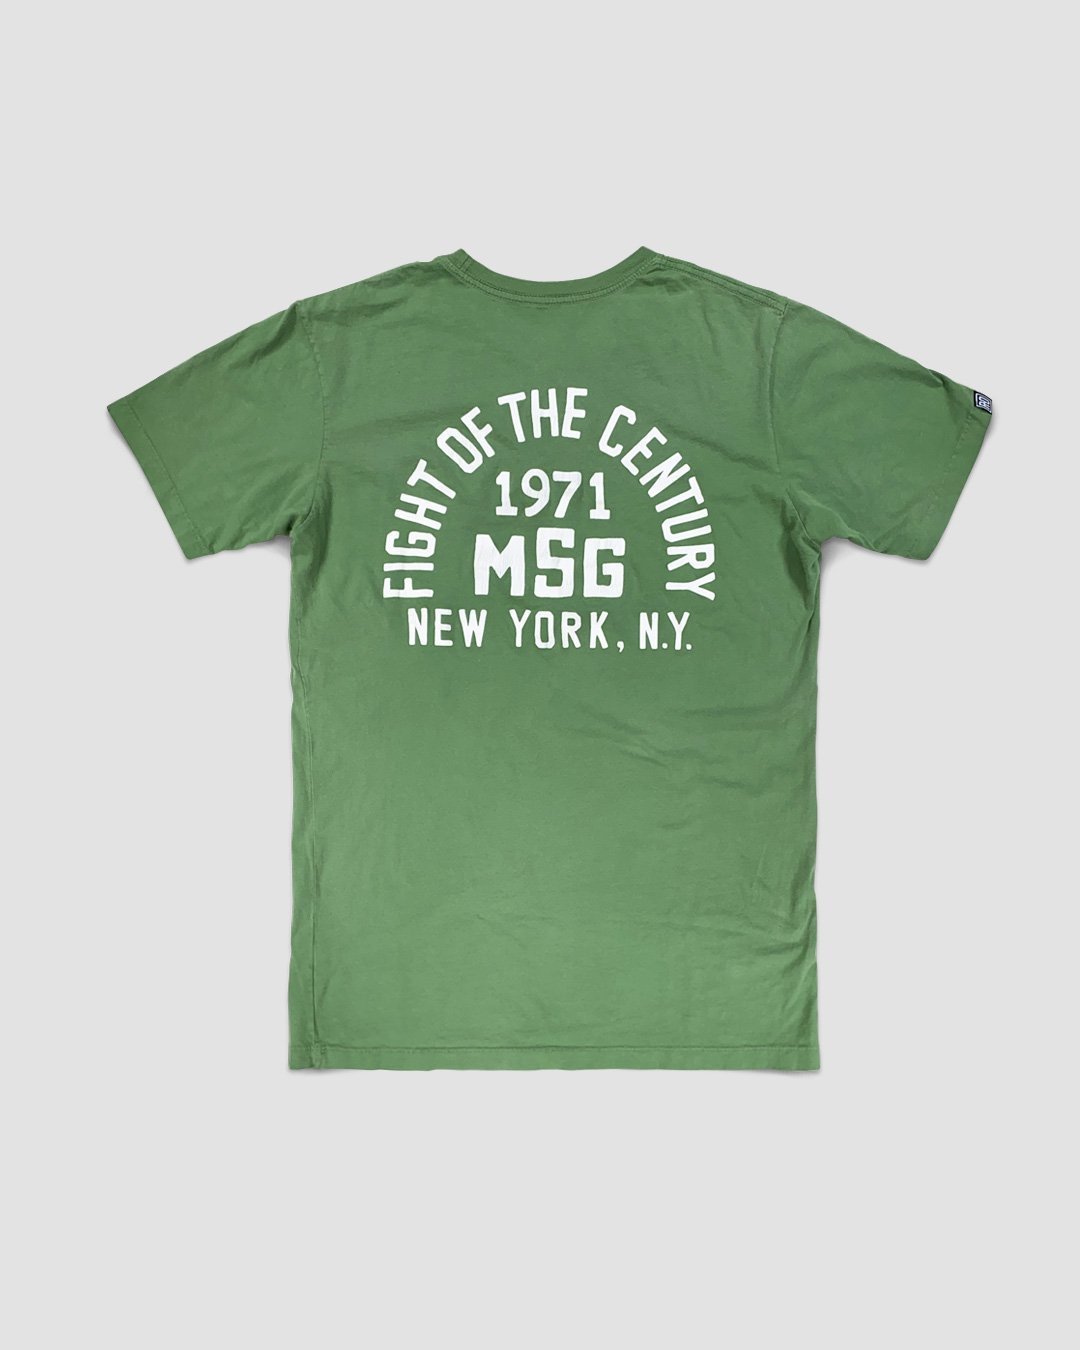 FOTC - Frazier 1971 MSG Tee - Roots of Fight Canada